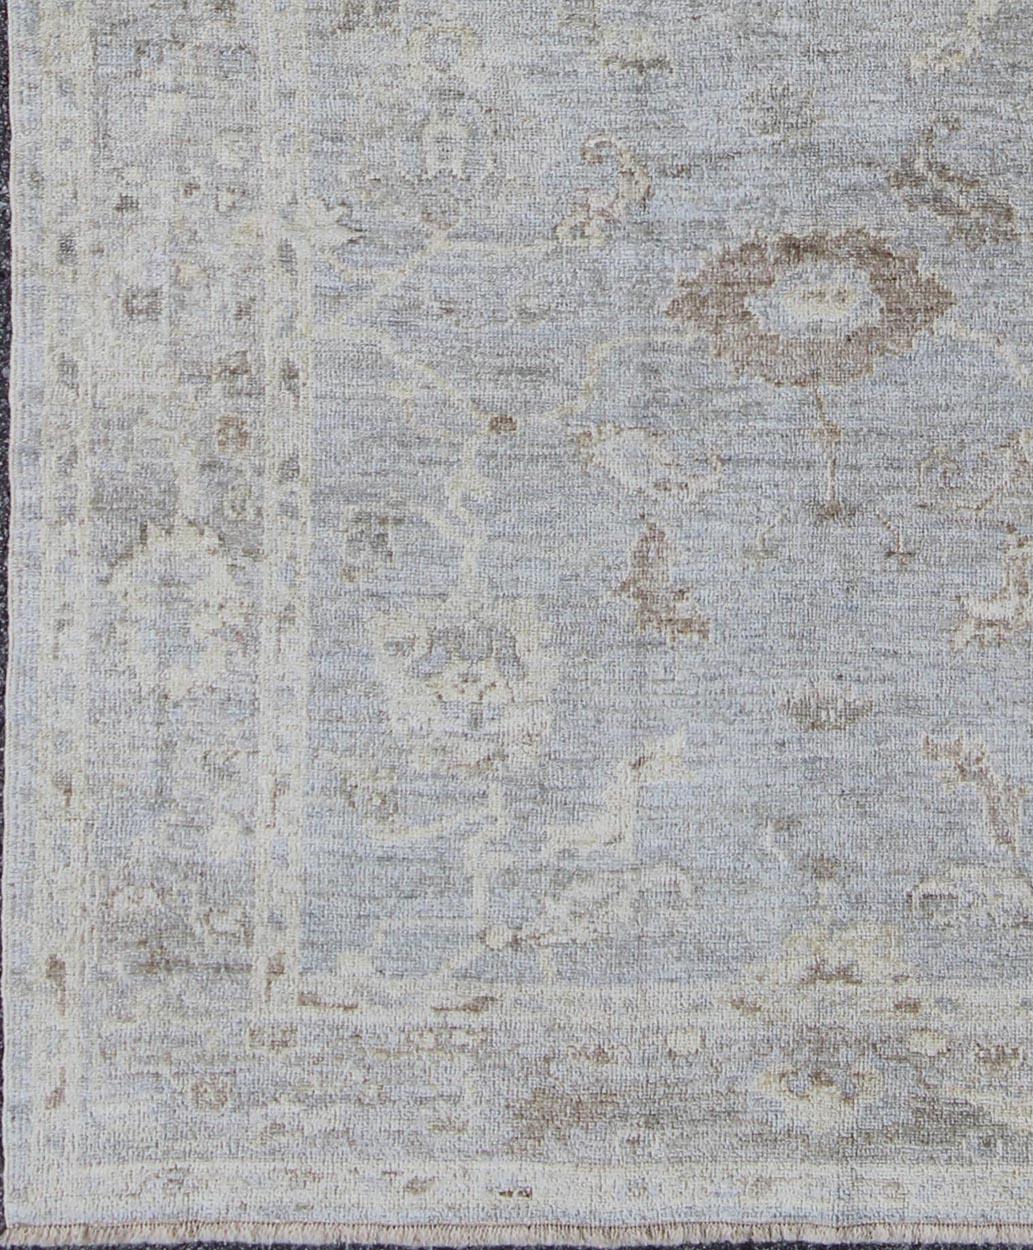 Shades of light blue, silver, taupe and cream Gallery Angora oushak rug from Turkey, rug AN-123329, country of origin / type: Turkey / Angora Oushak.

From our Angora collection, this piece is made with a combination of angora and old wool.